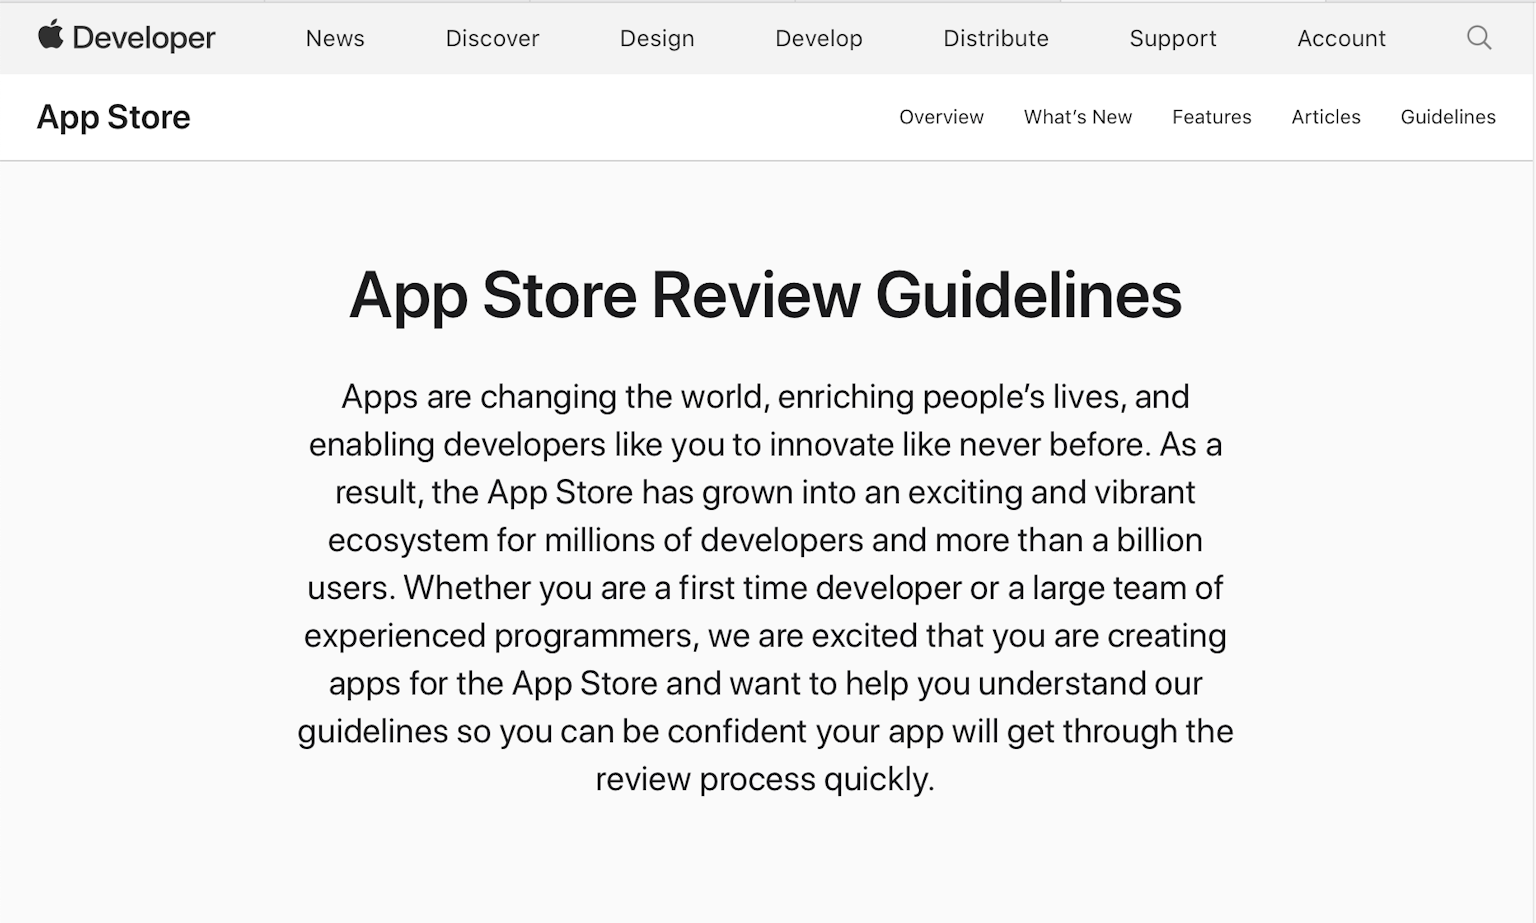 App Store review guidelines can be complicated to read